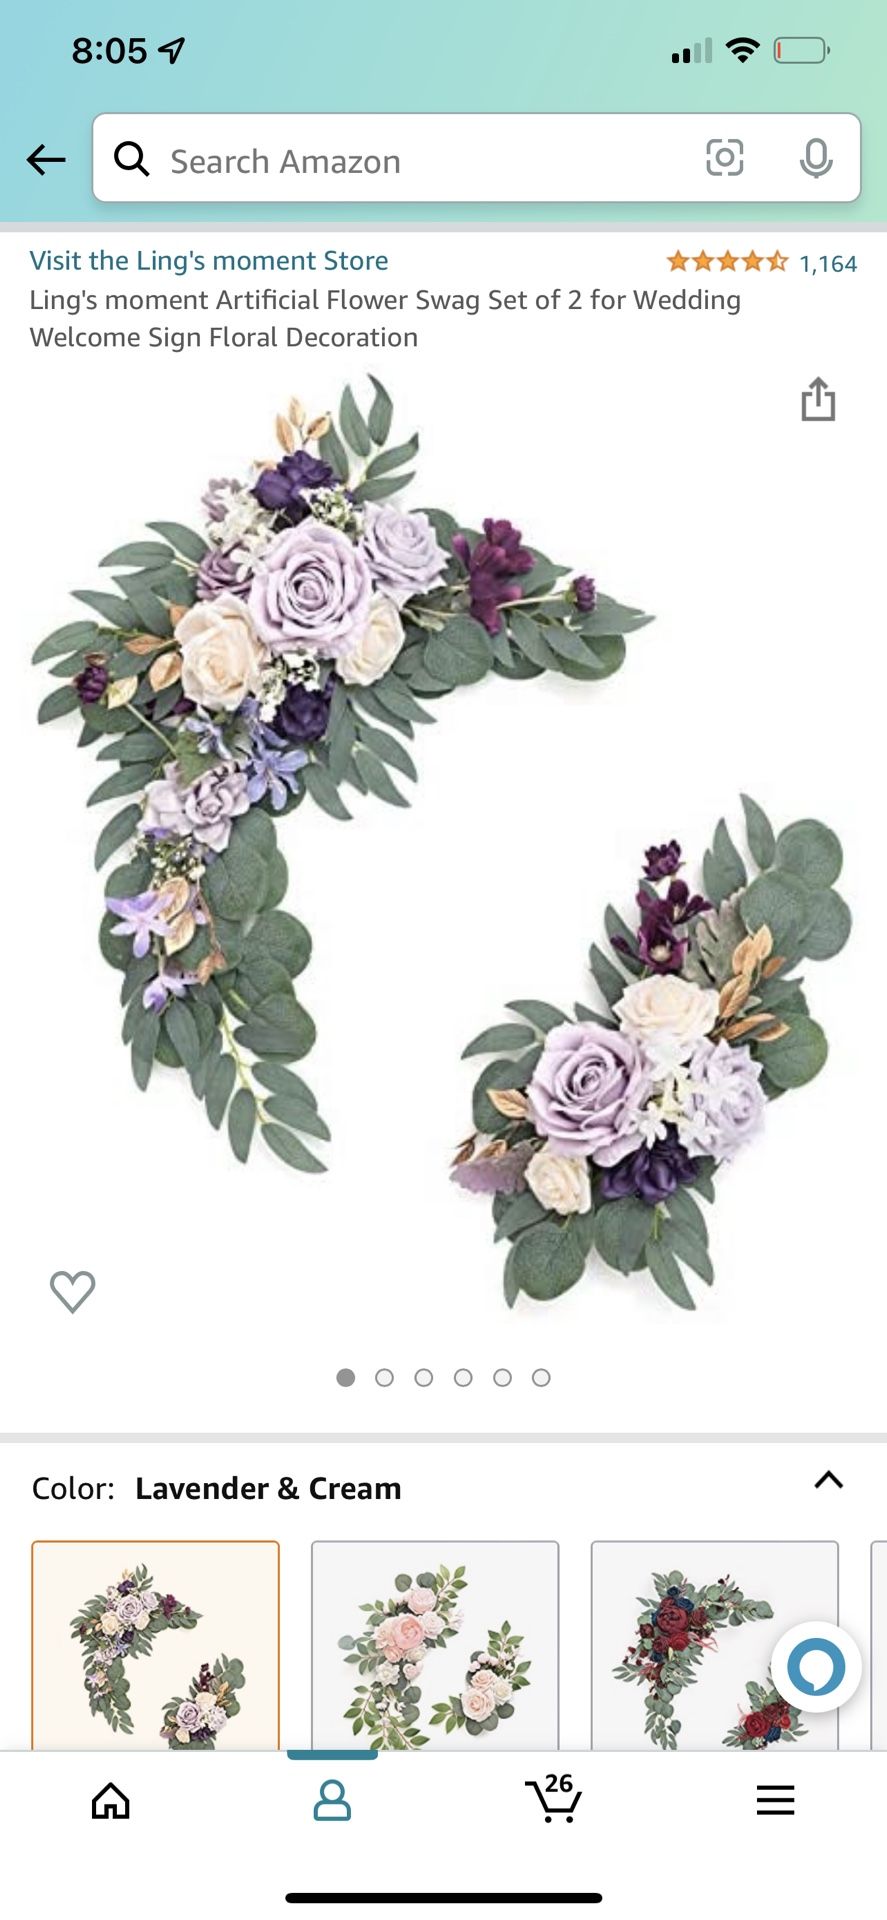 Ling's moment Artificial Flower Swag Set of 2 for Wedding Welcome Sign Floral Decoration https://offerup.com/redirect/?o=aHR0cHM6Ly93d3cuYW1hem9uLmNvb